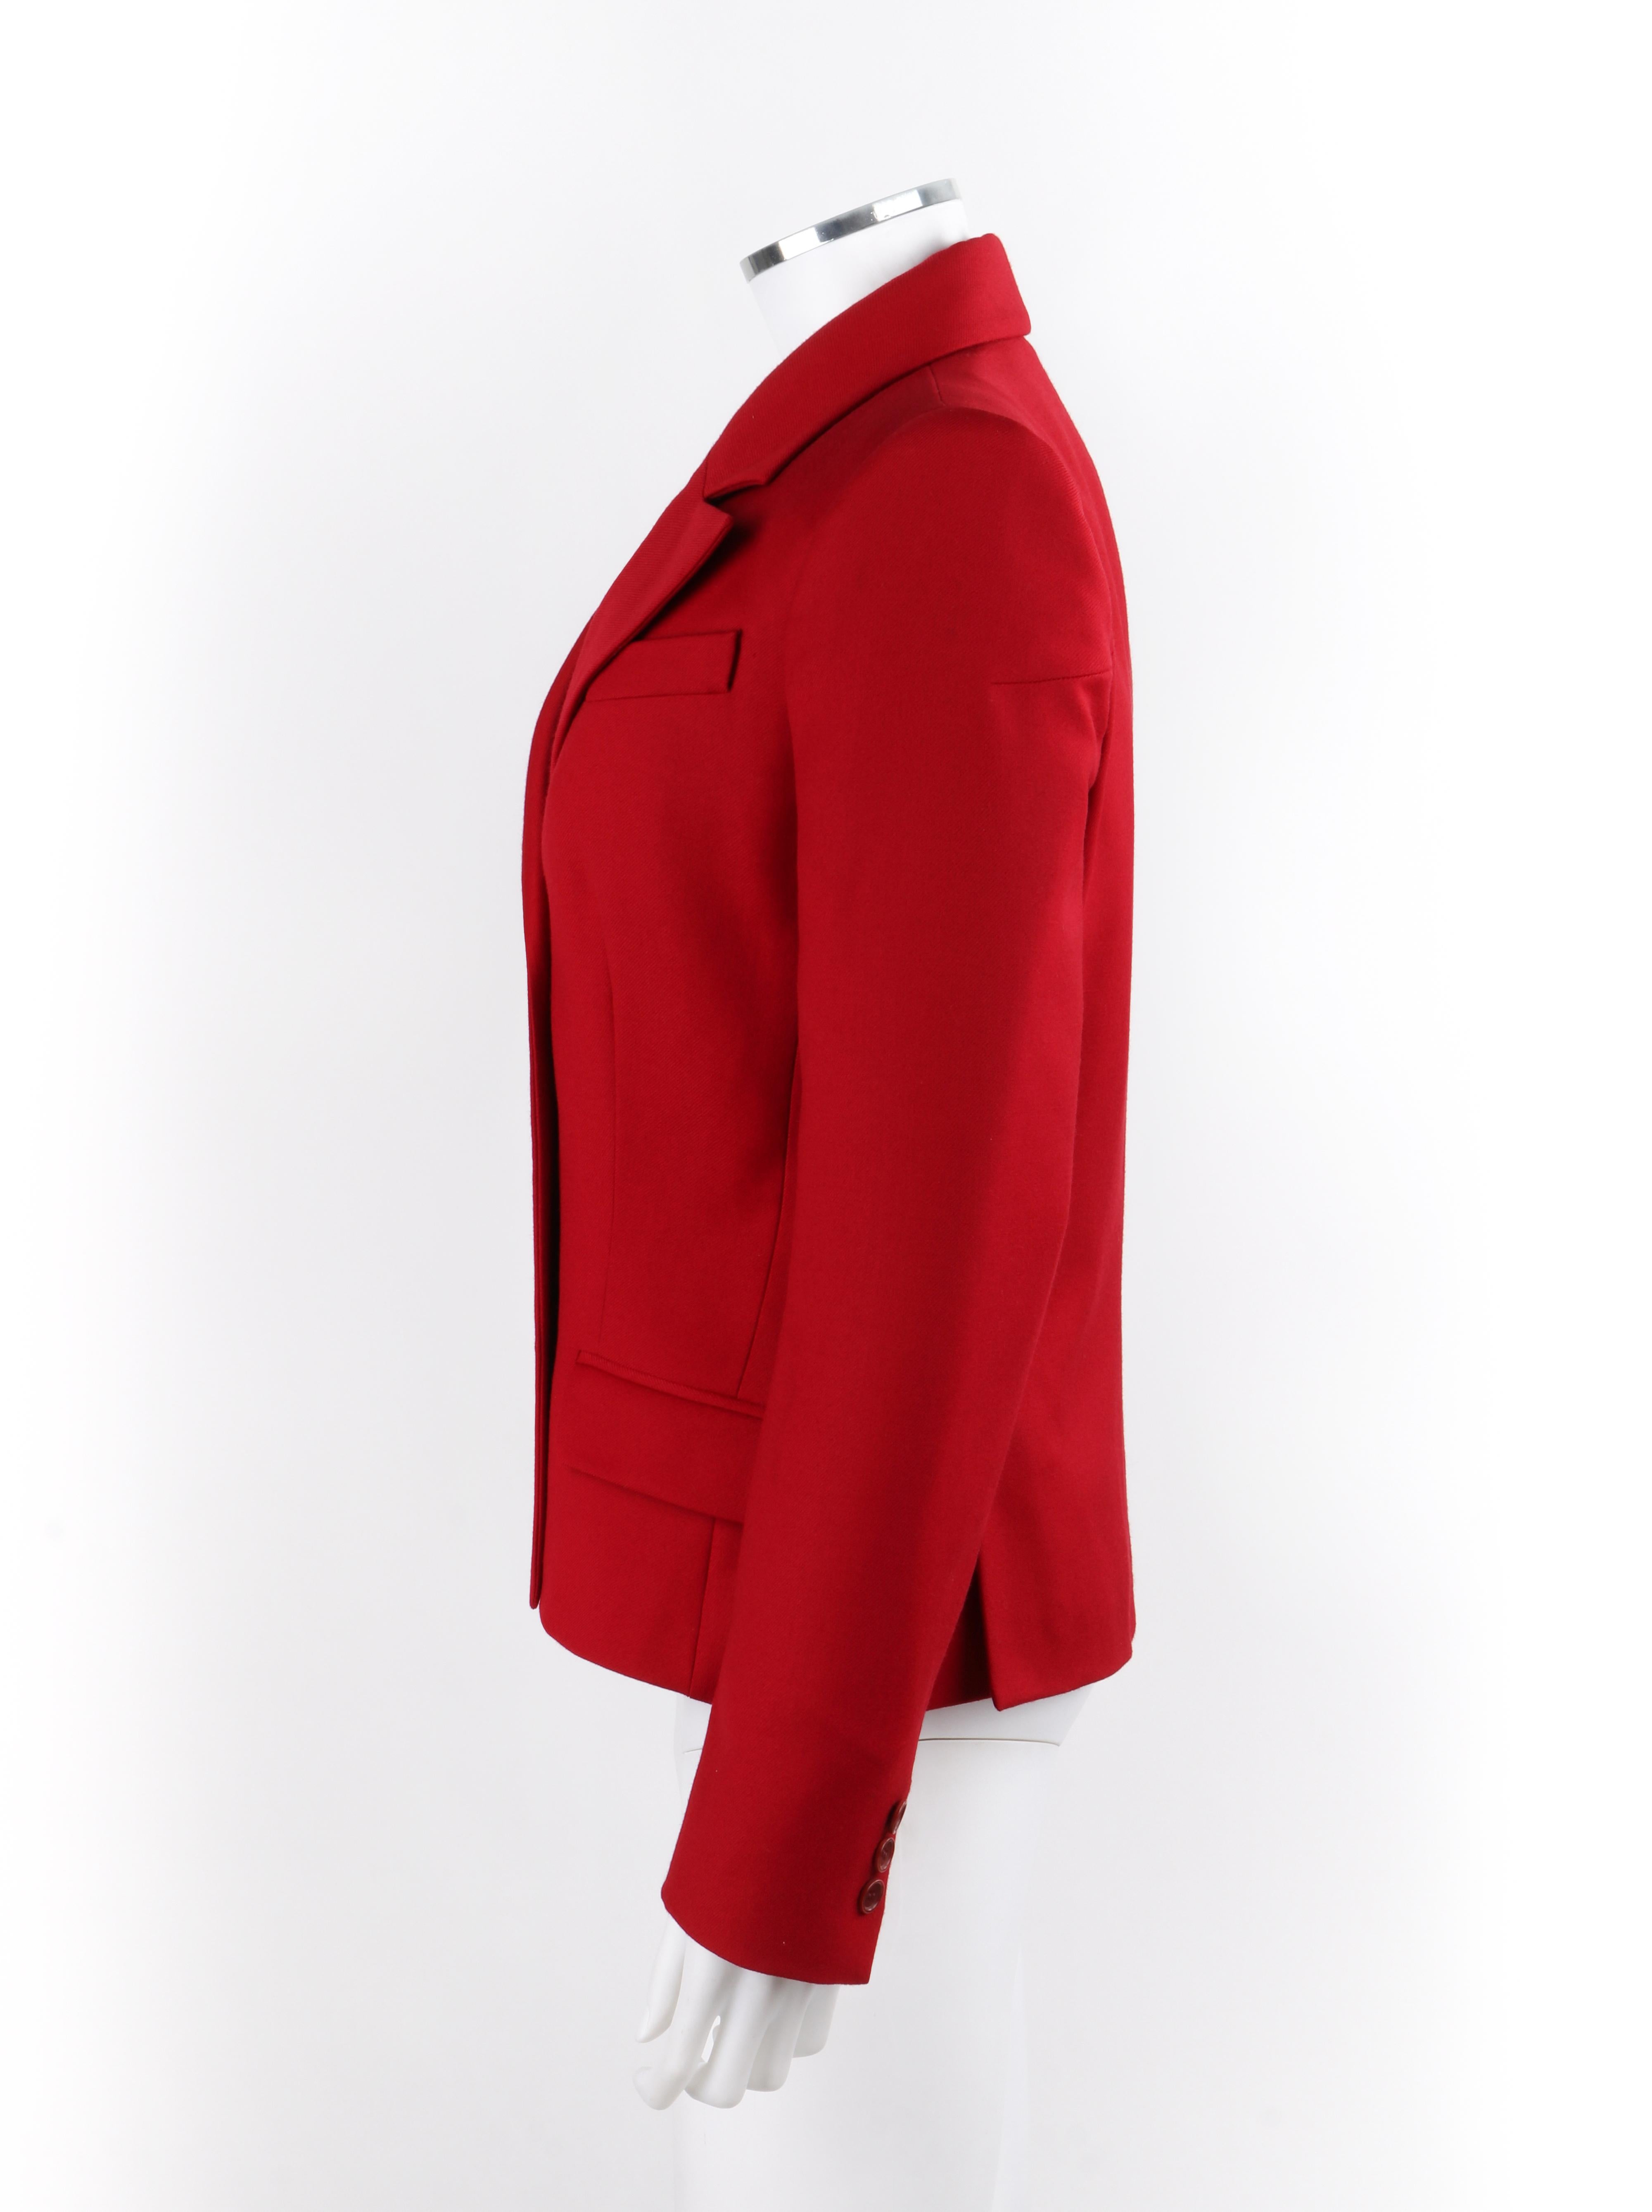 ALEXANDER McQUEEN A/W 1998 “Joan” Red Double Breasted Button Front Blazer Jacket For Sale 1